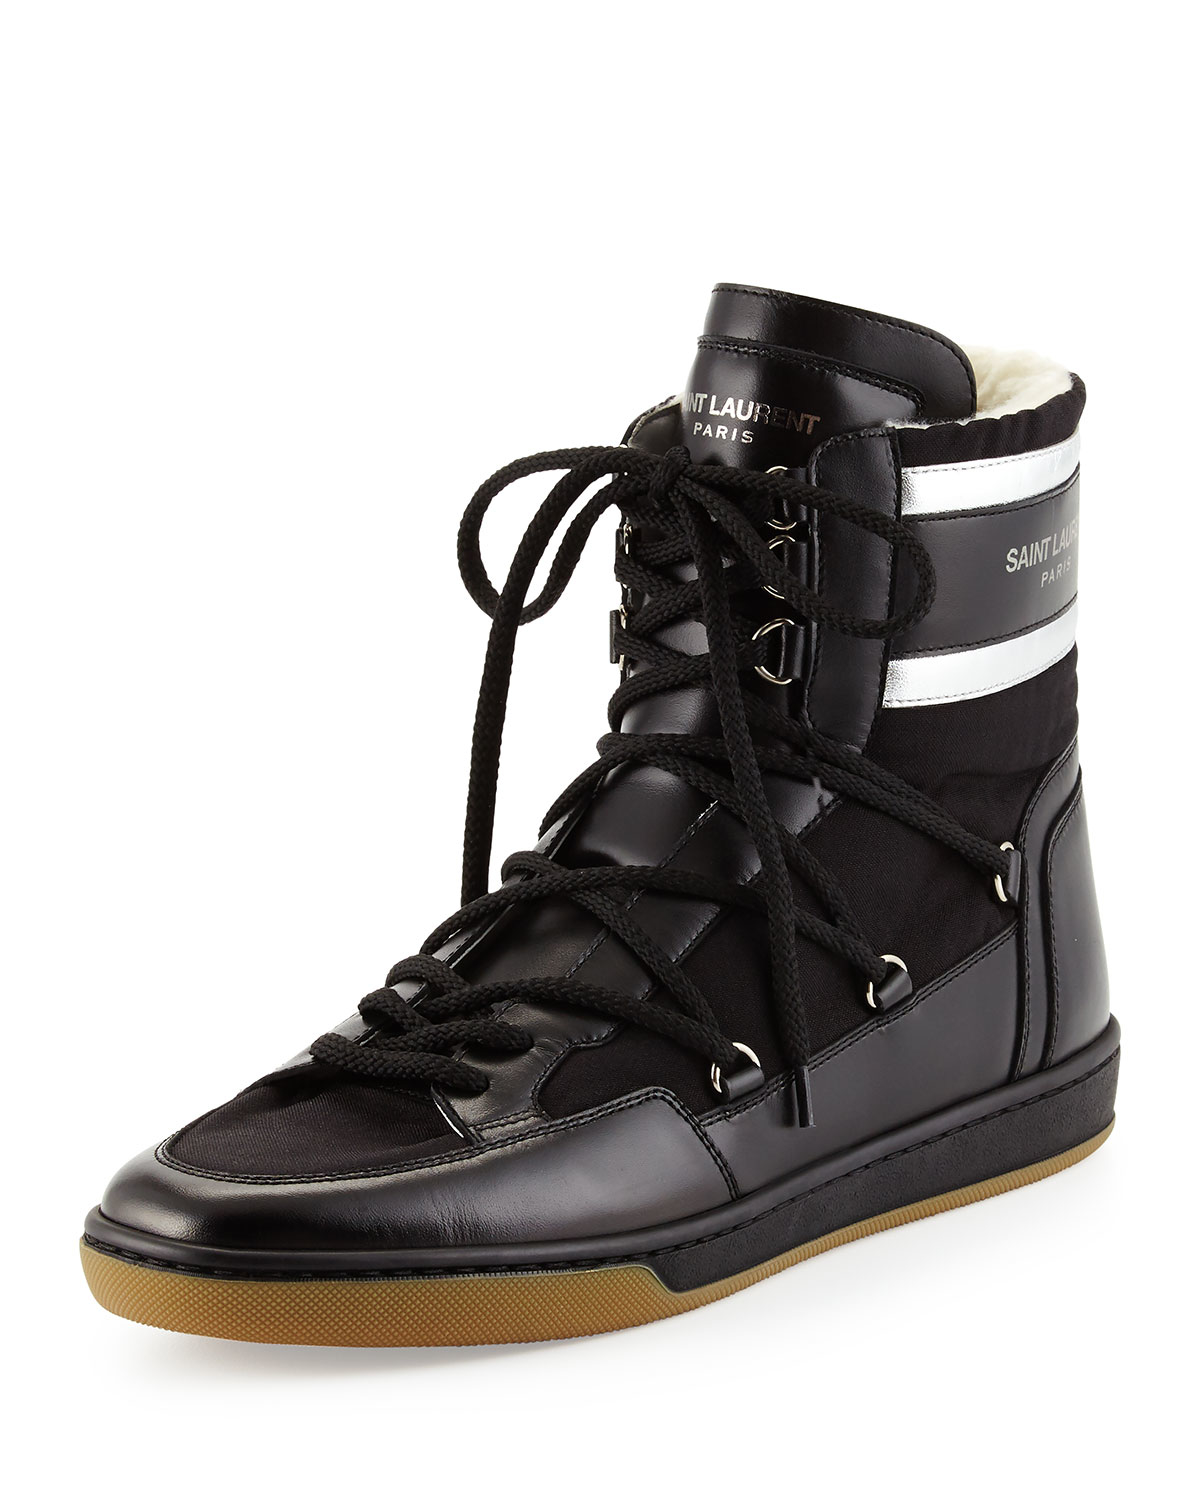 Saint laurent Fur-Lined Leather High-Top Sneakers in Black | Lyst